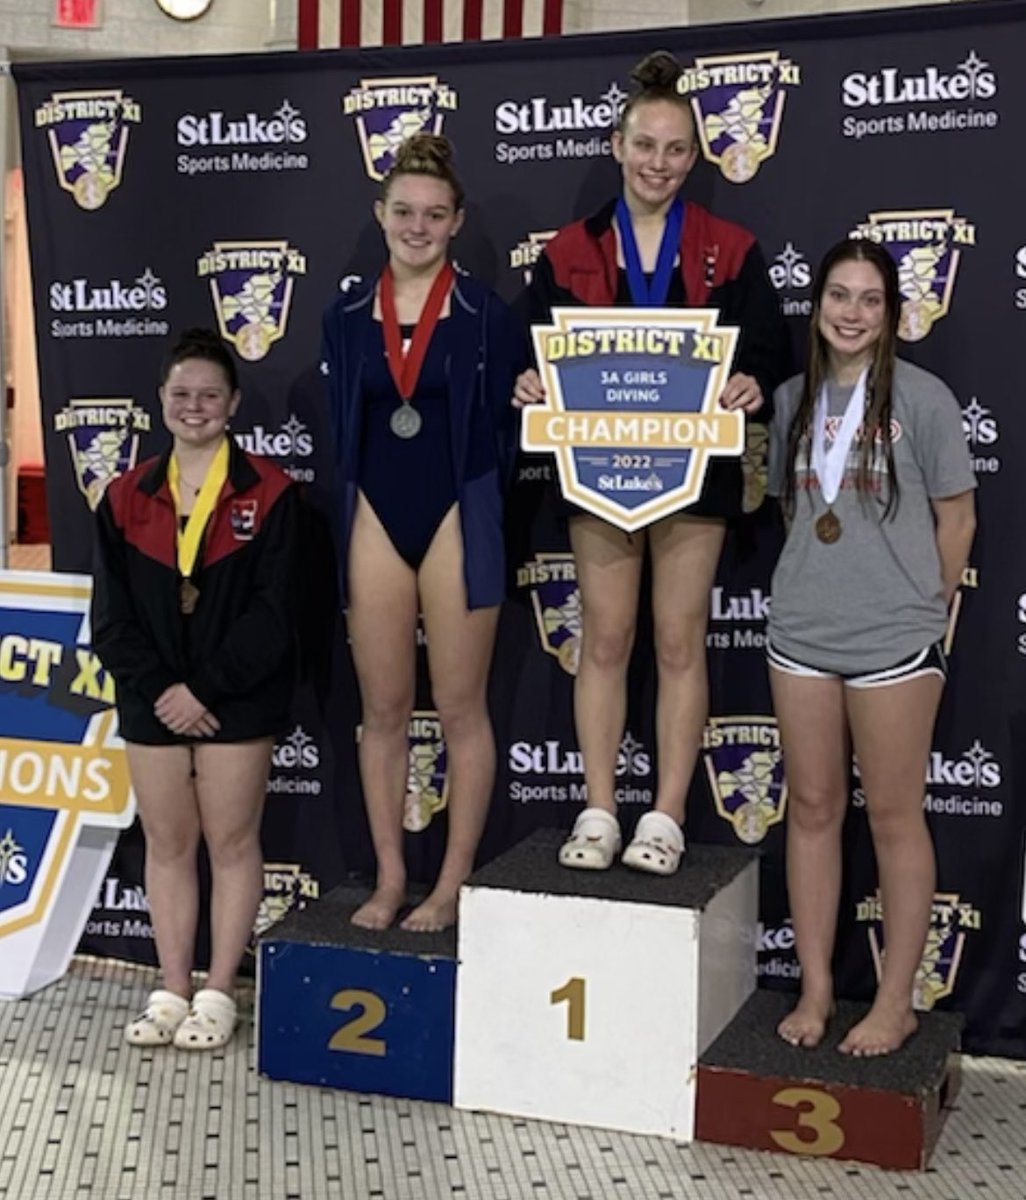 Congratulations Nicole on Taking 3rd place in the District XI Dive Championships held over the weekend.